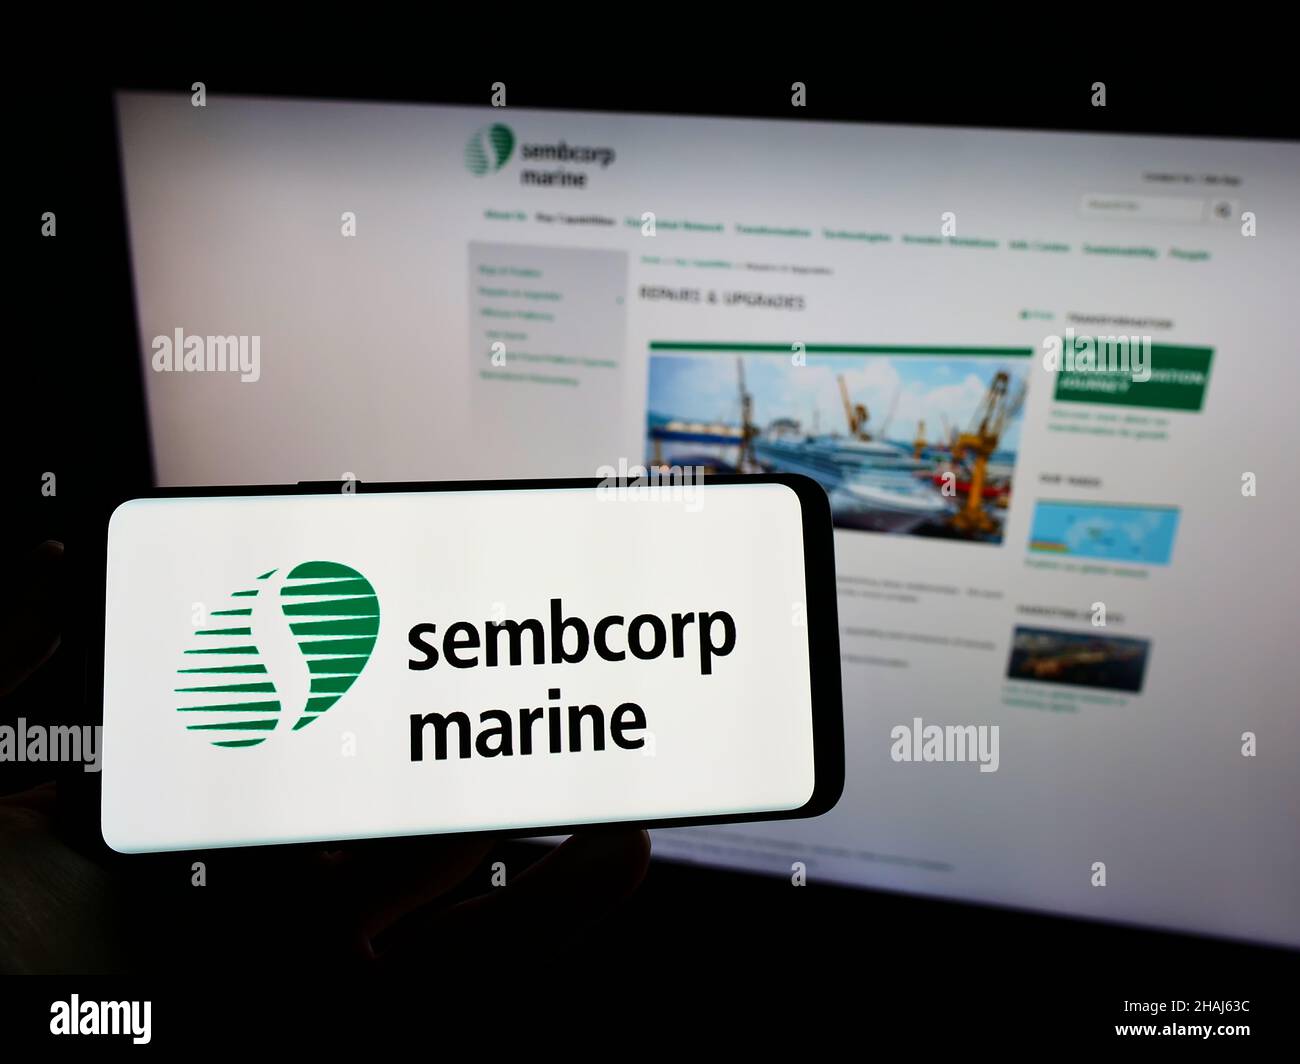 Person holding mobile phone with logo of Singaporean company Sembcorp Industries Ltd on screen in front of web page. Focus on phone display. Stock Photo